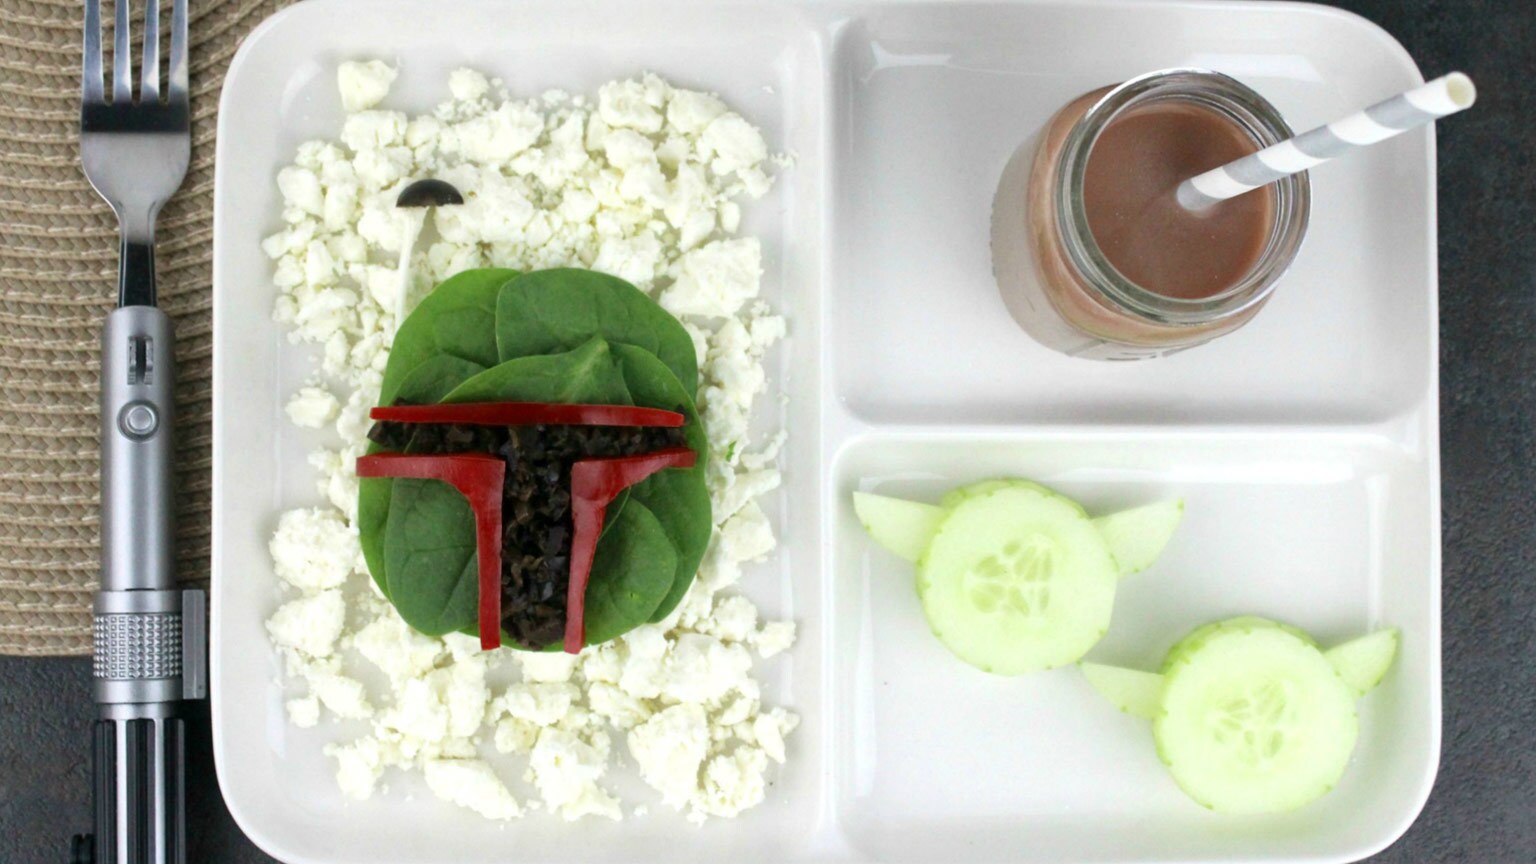 Empire at 40 | Make Boba "Feta" Salad for a Most Impressive Dinner and Movie Night